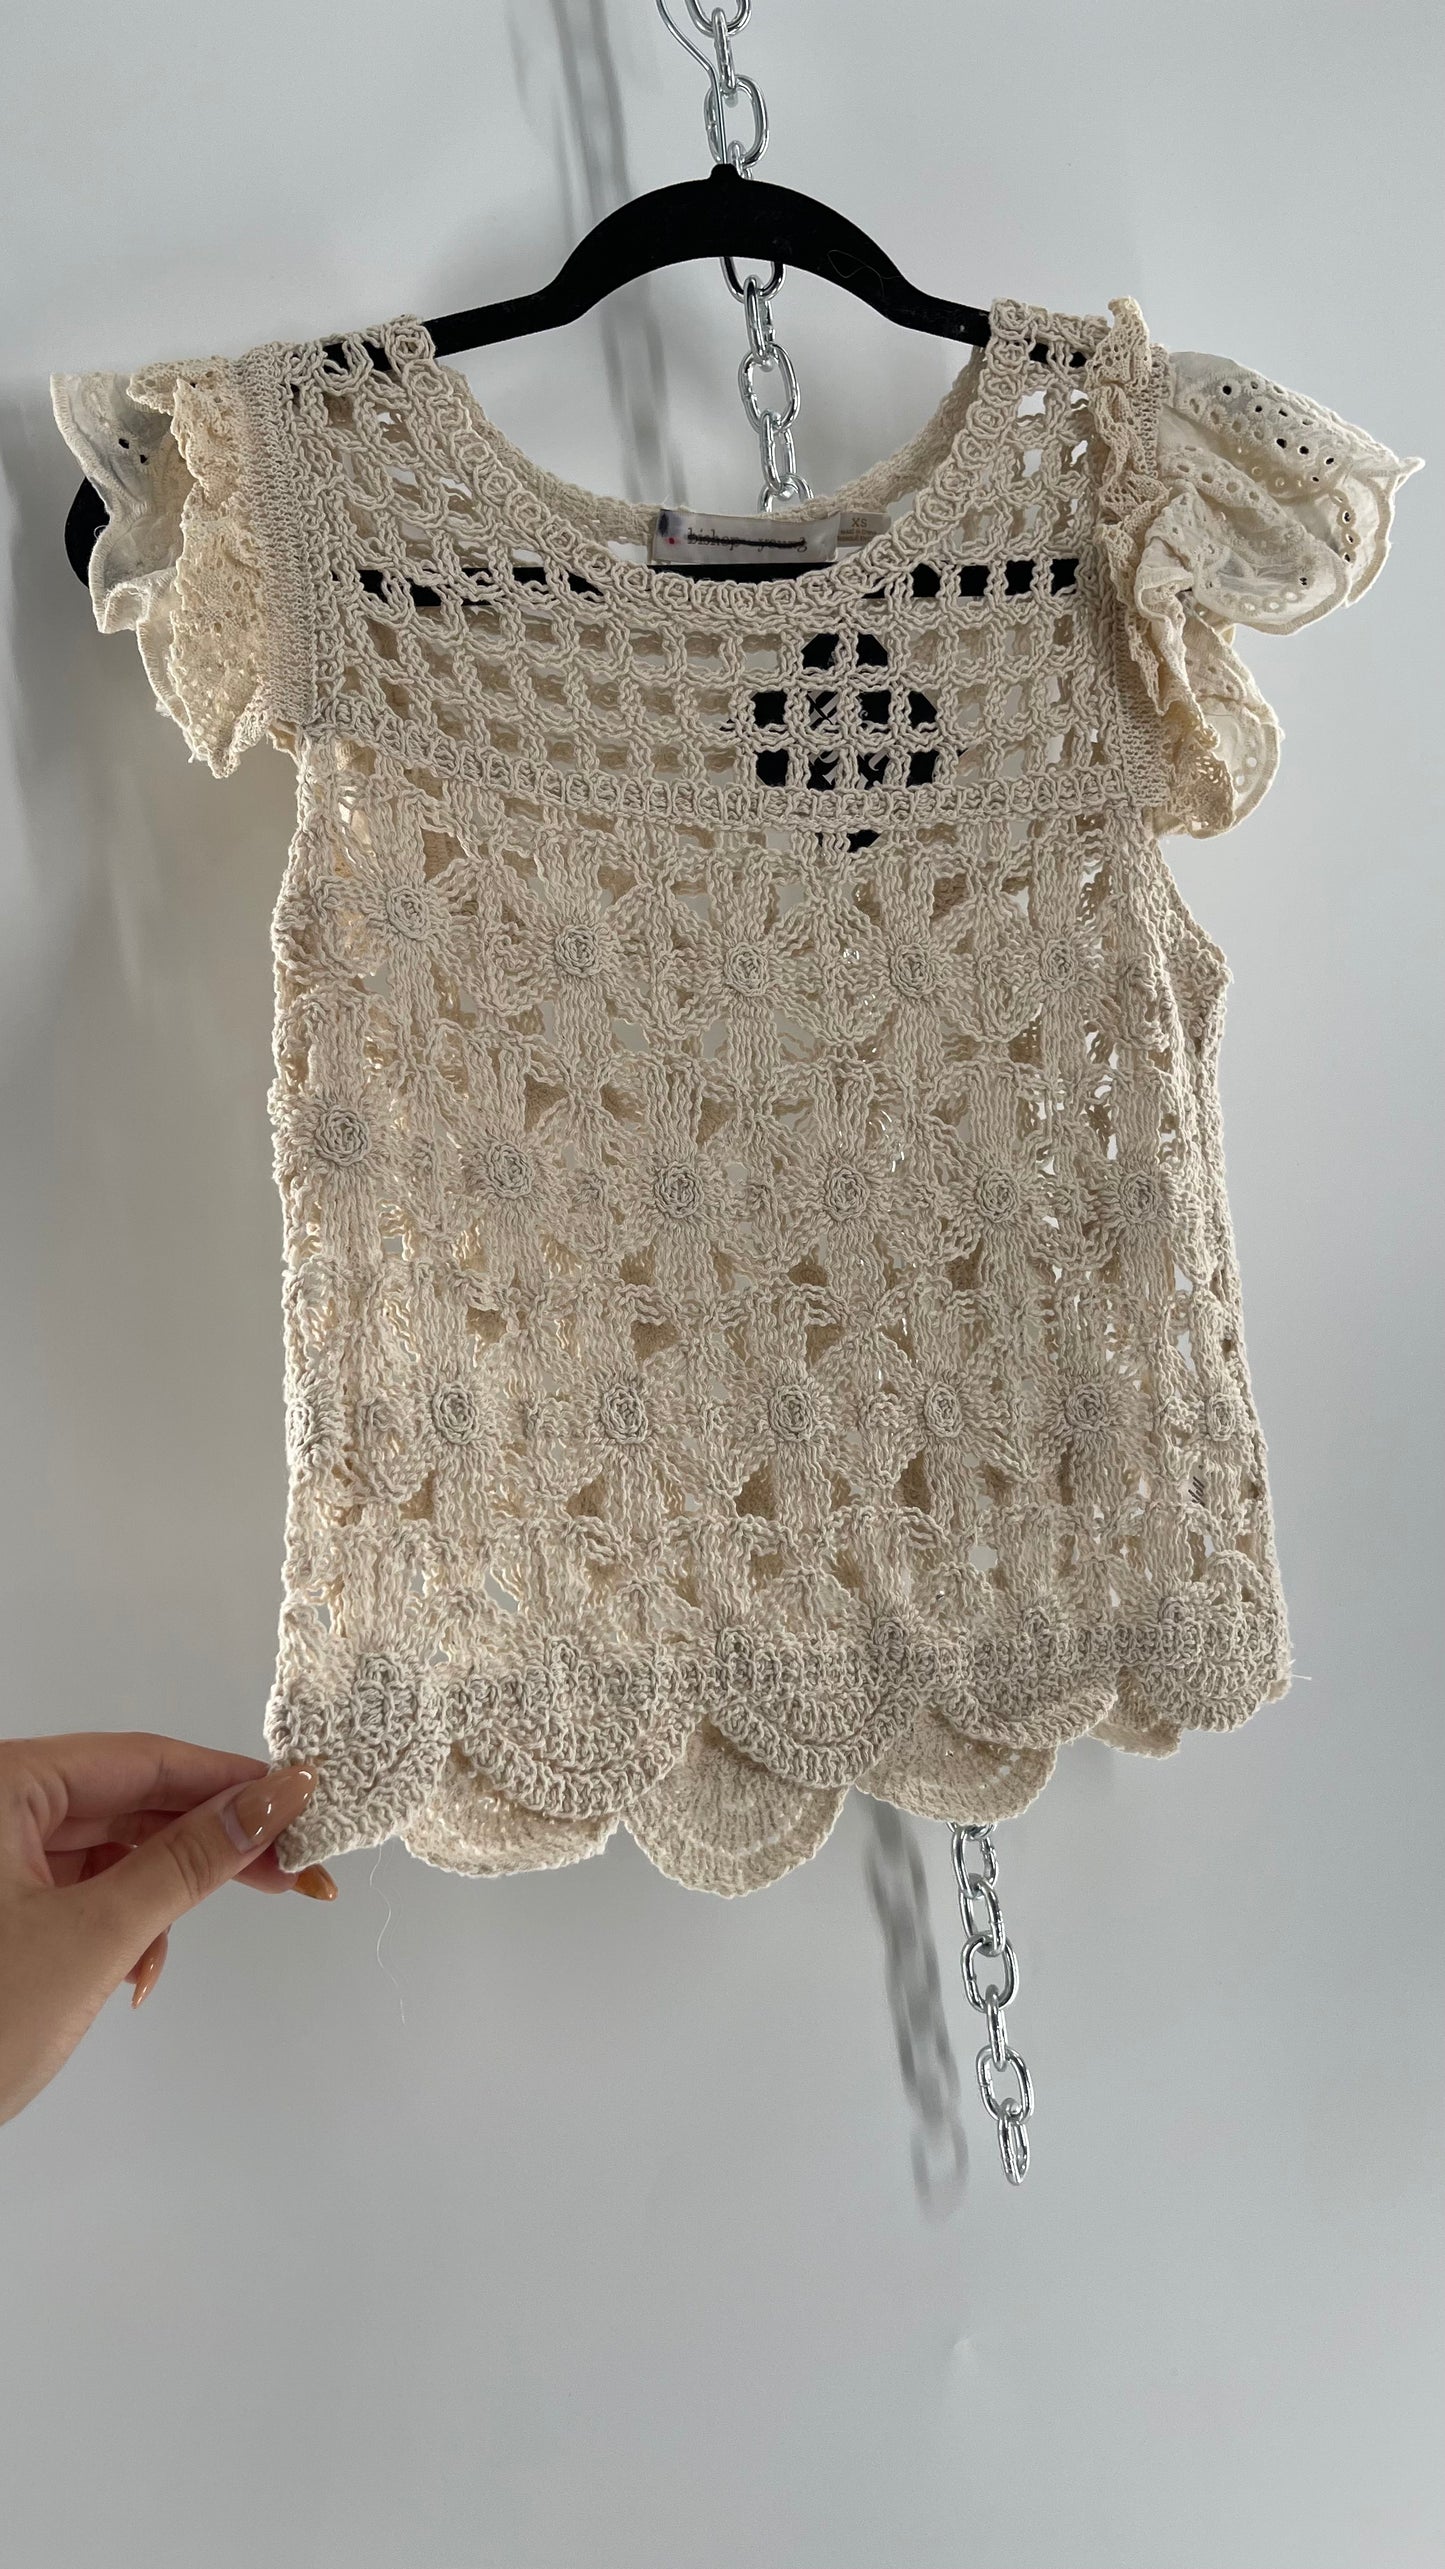 Bishop + Young Anthropologie Crochet Tank with Scalloped Hem and Lace Lined Sleeves (Medium)